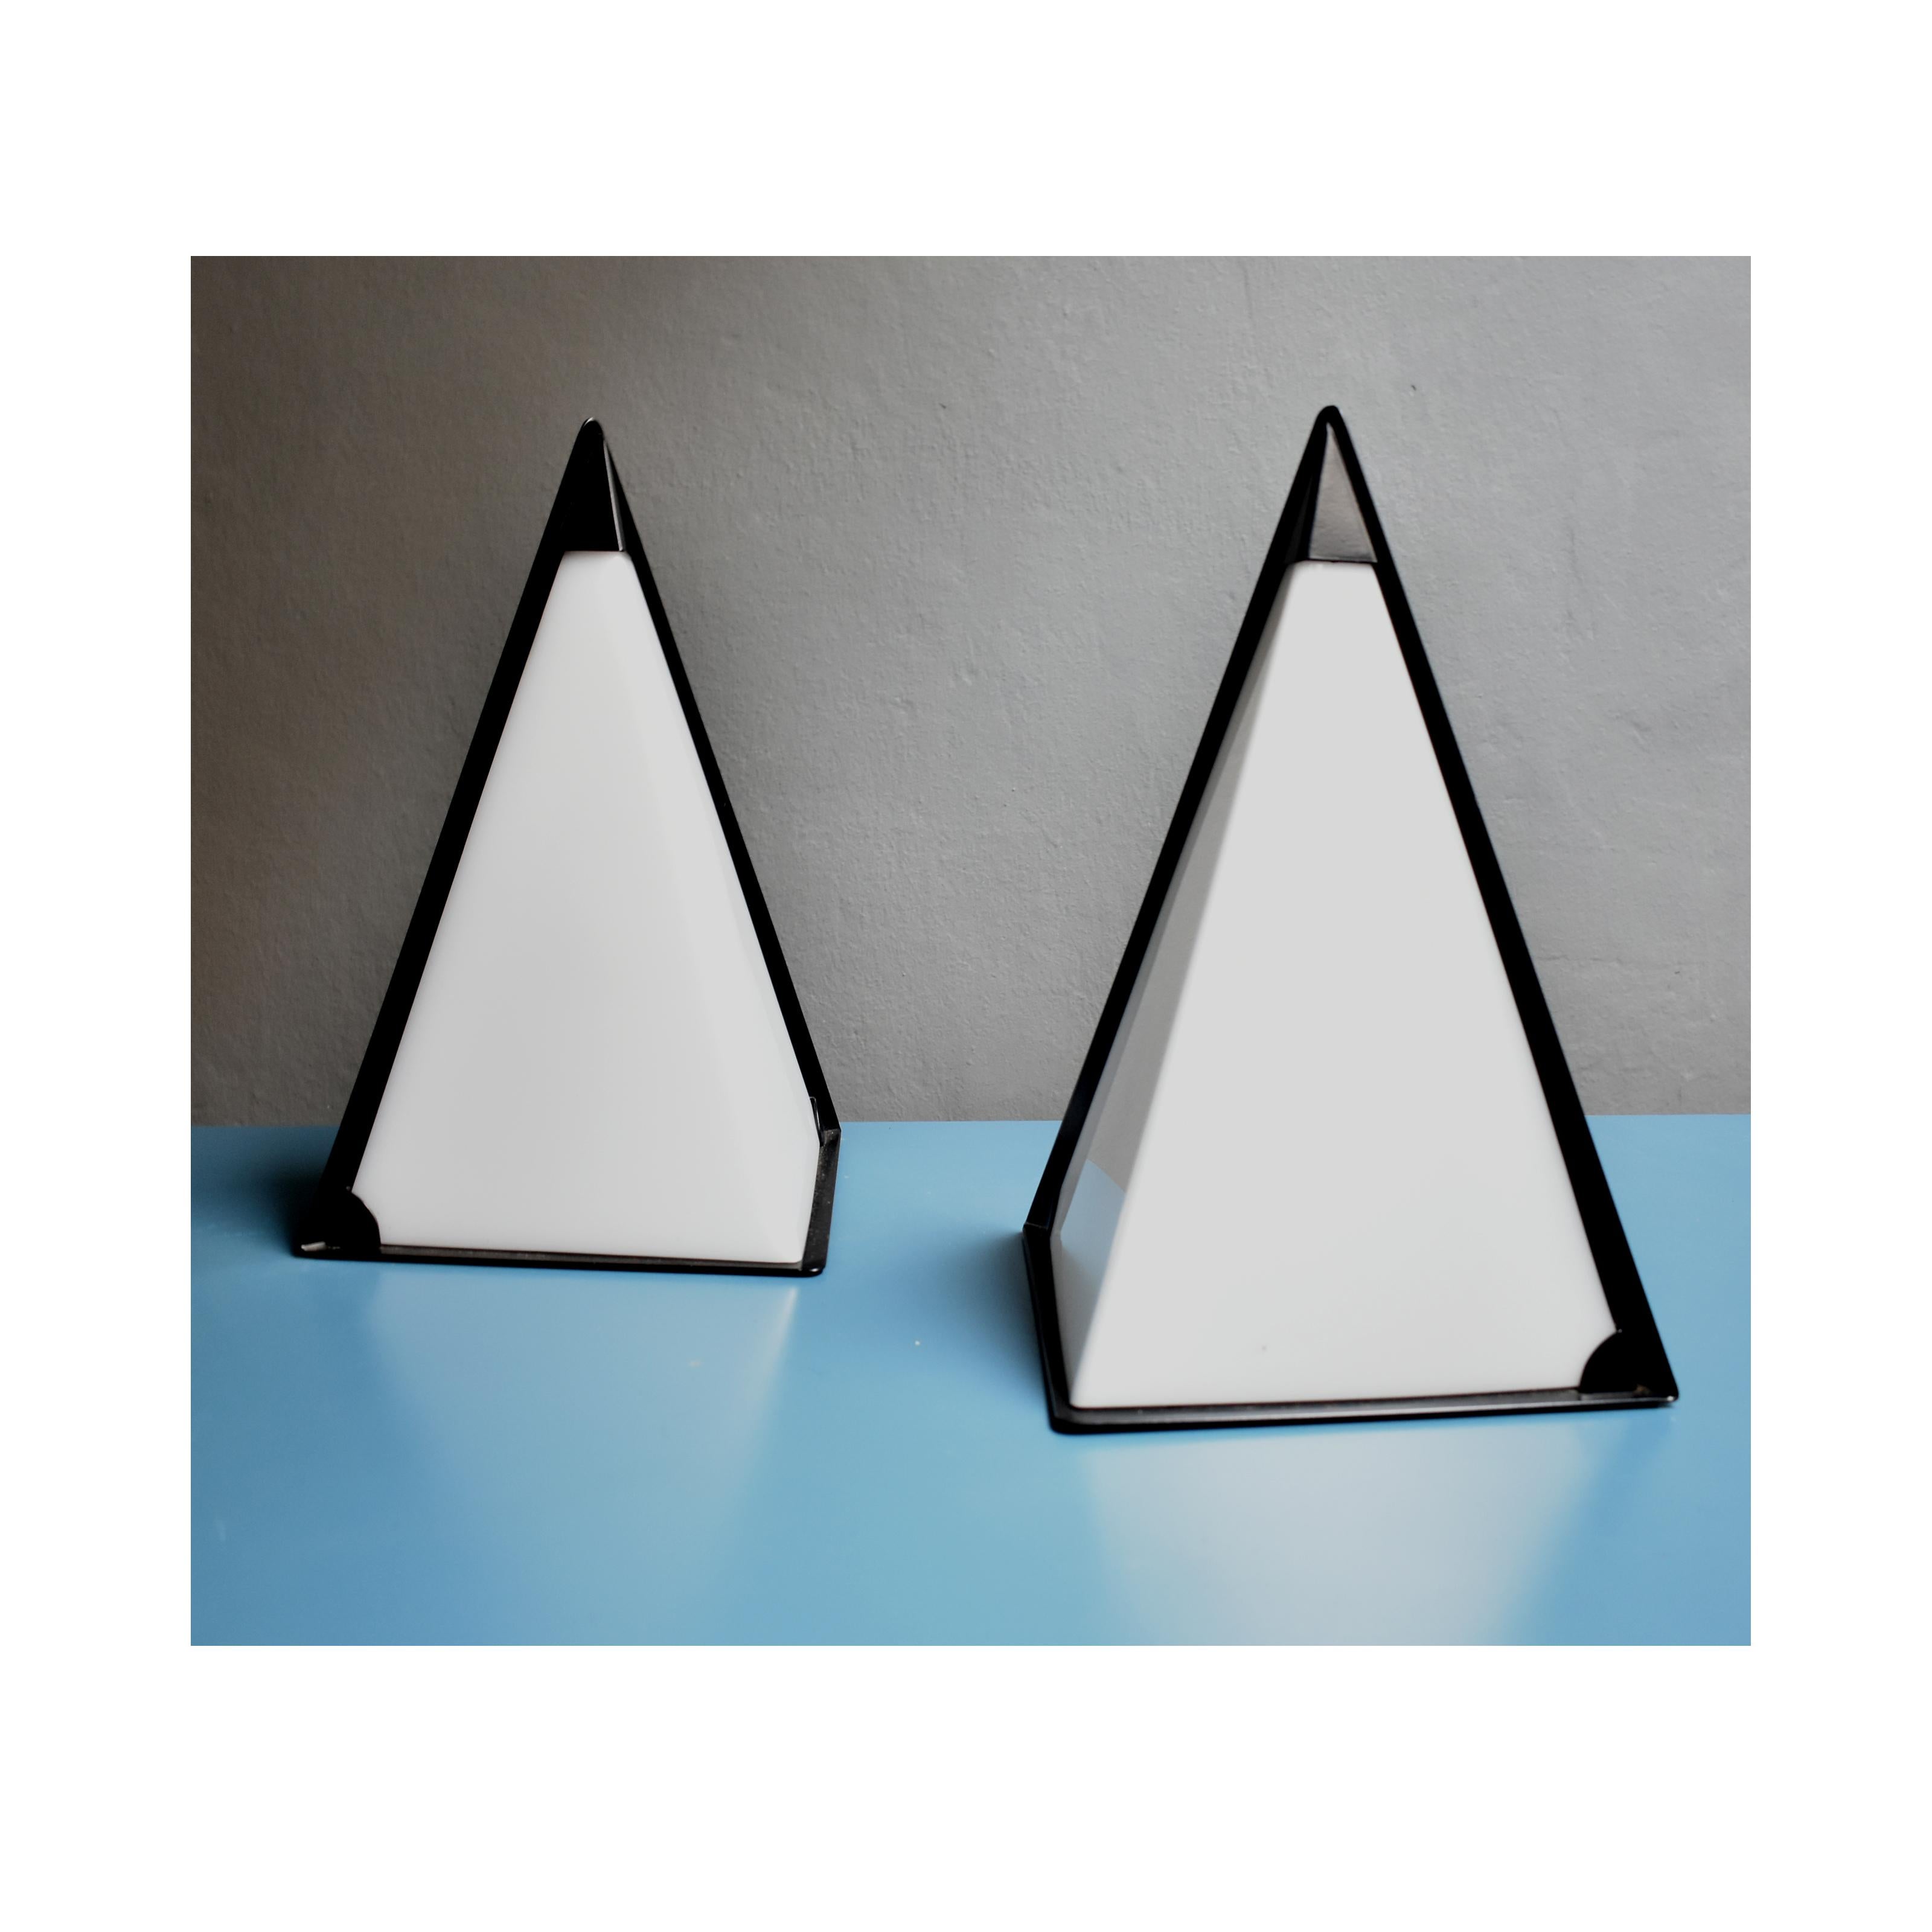 Italian manufacture, vintage table lamp by Zonca from 1980
The lamps have a pyramidal shape, with an external  black iron structure and white plastic diffuser.
Very good condition, however the lamp may show traces related to time. 
it is